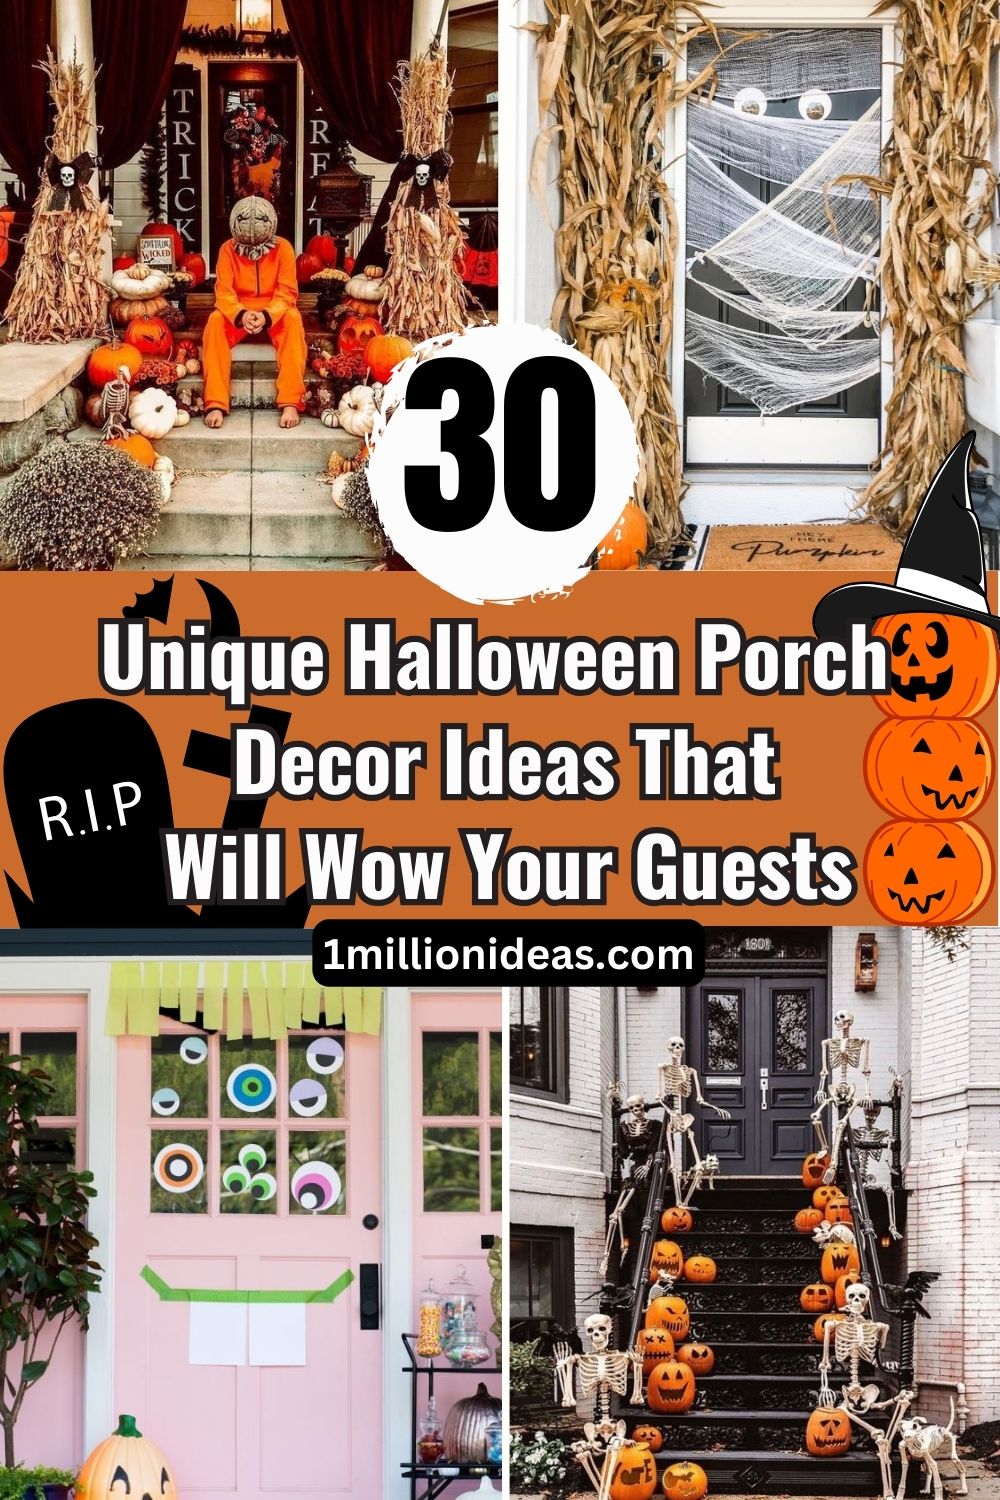 30 Unique Halloween Porch Decor Ideas That Will Wow Your Guests